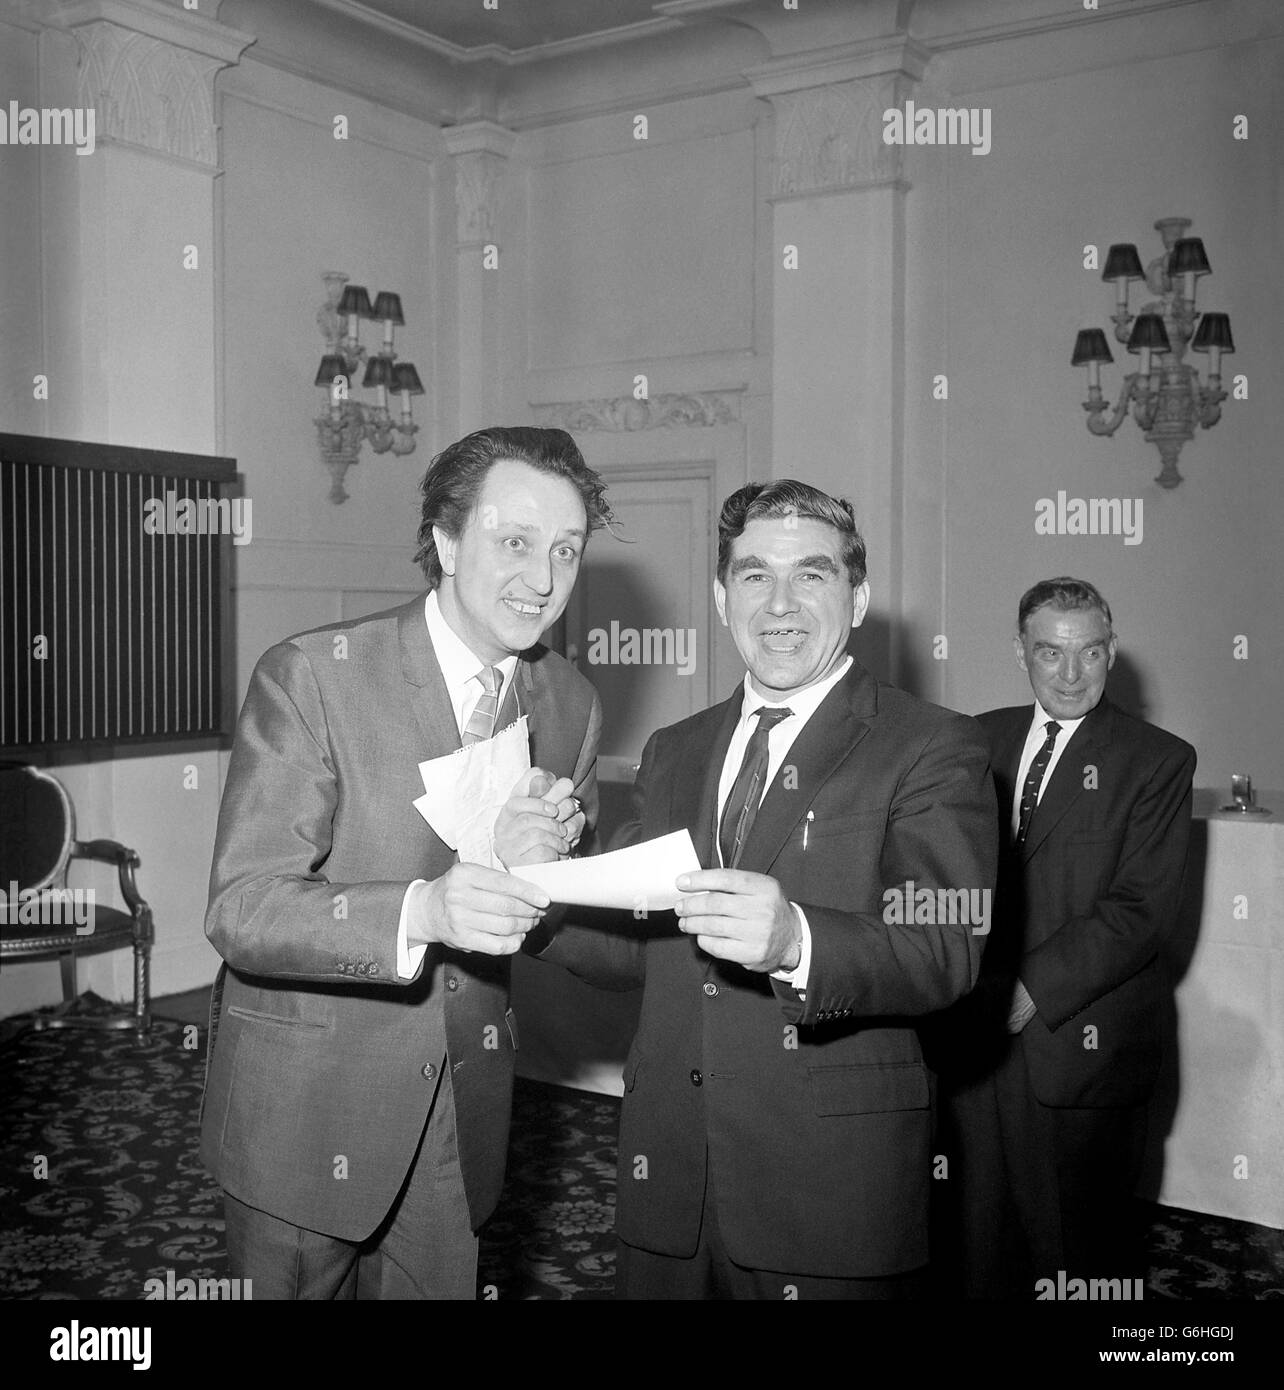 66,229.4s., to Mr Arthur Ramsdale, 40, an underground mechanic of Bilsthorpe colliery, Nottinghamshire, which he won in the Littlewoods Penny Treble Chance, this week. Ken Dodd handed over the cheque to Arthur in a ceremony at Grosvenor House, London. Stock Photo